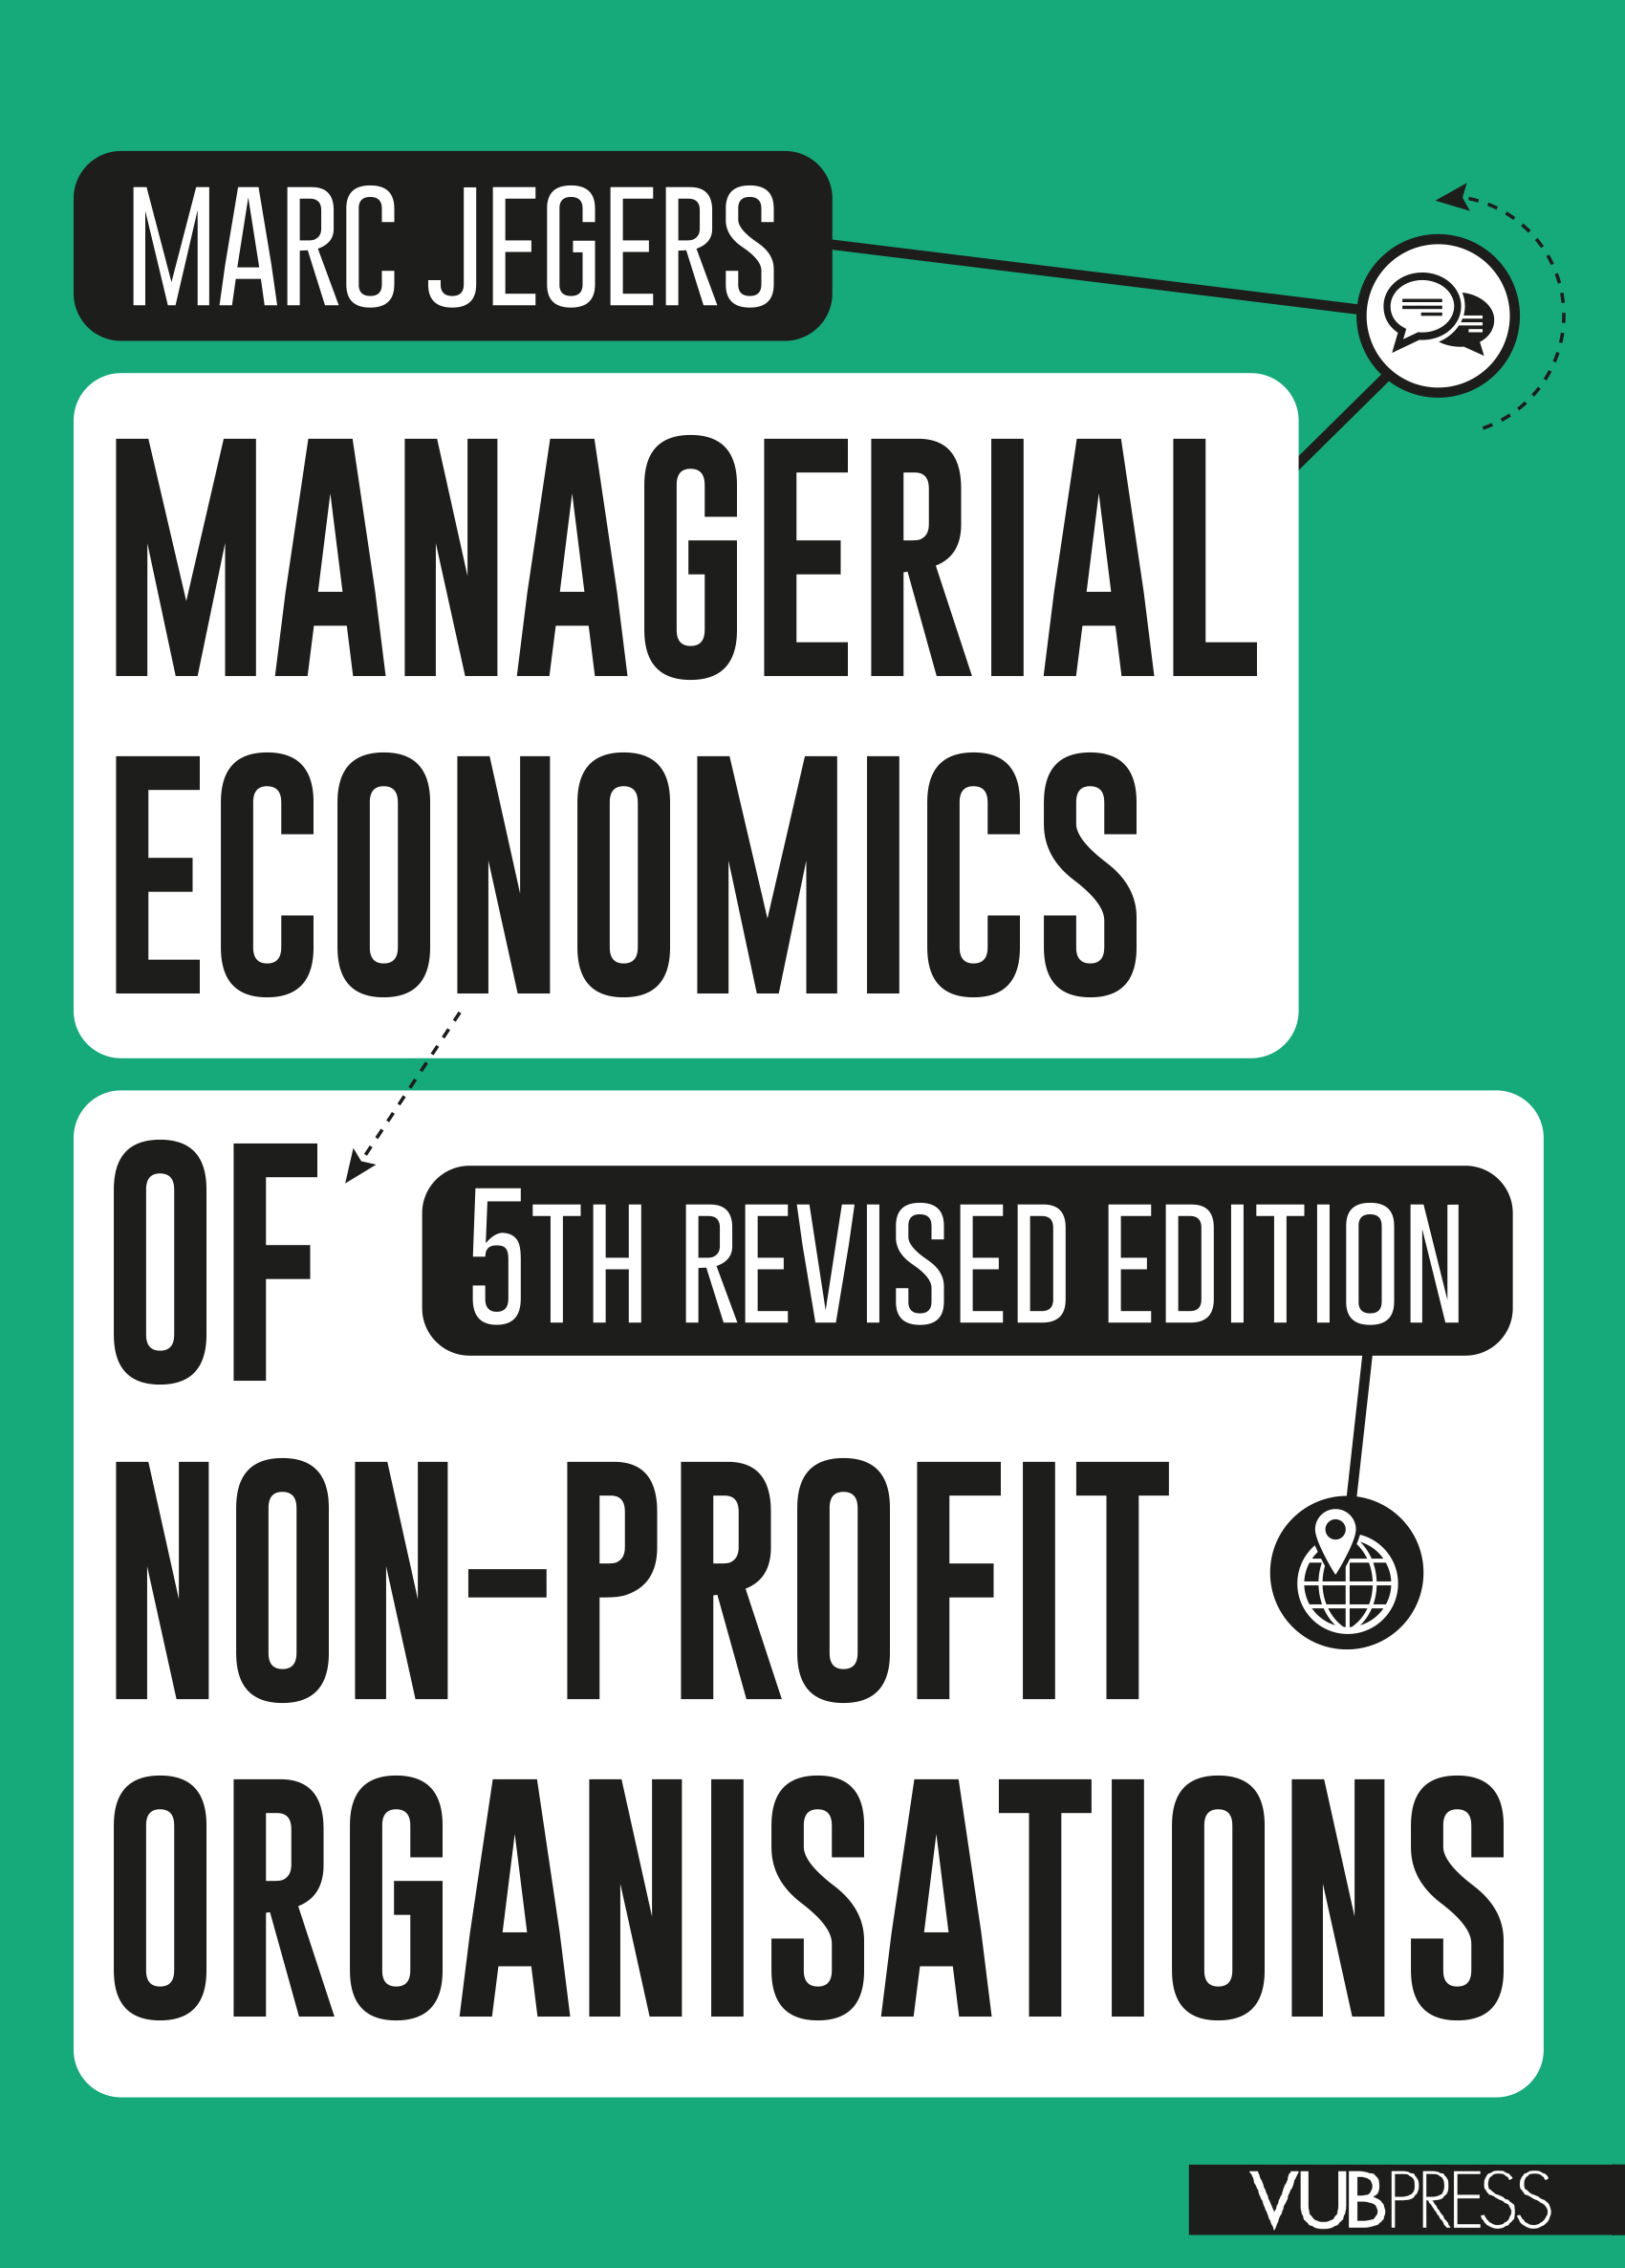 MANAGERIAL ECONOMICS OF NON-PROFIT ORGANISATIONS (5th revised edition)